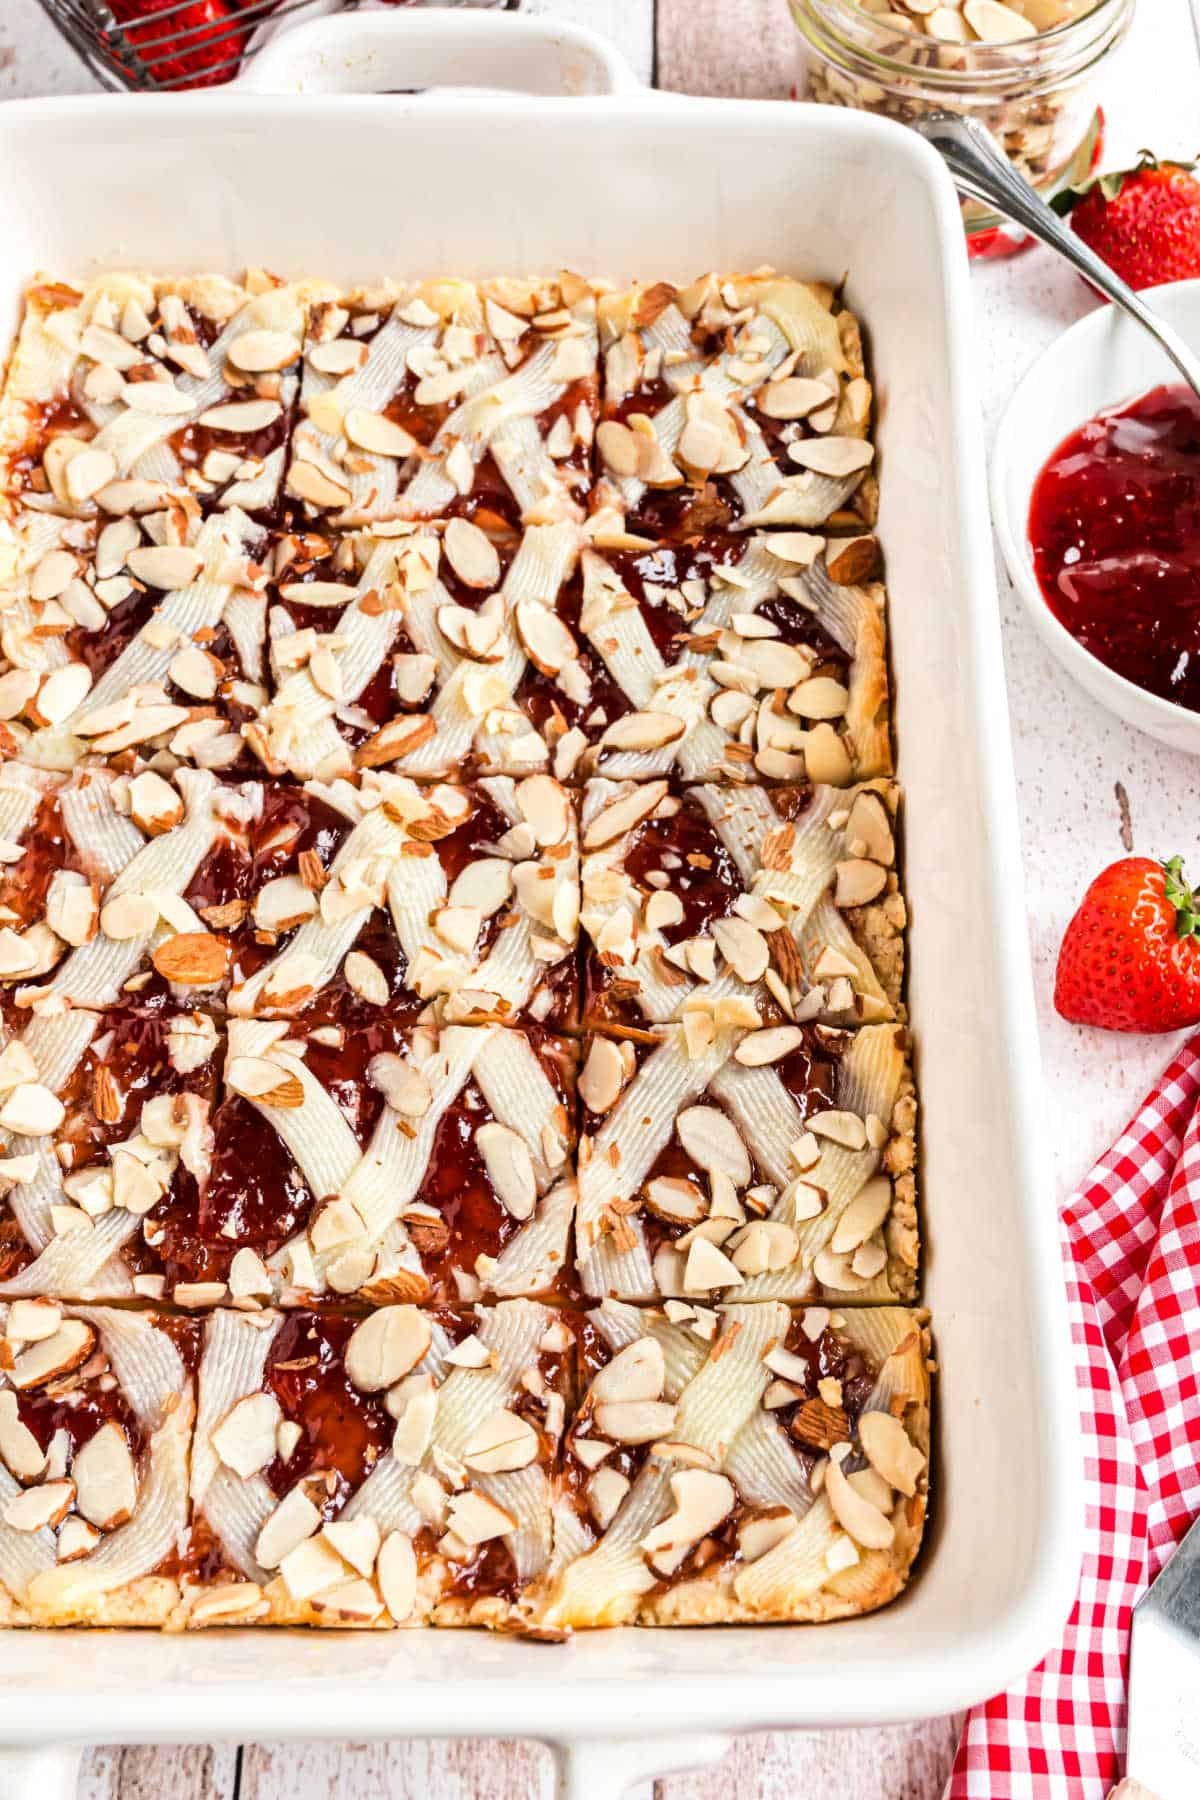 Strawberry almond bars baked in a white 13x9 baking dish.